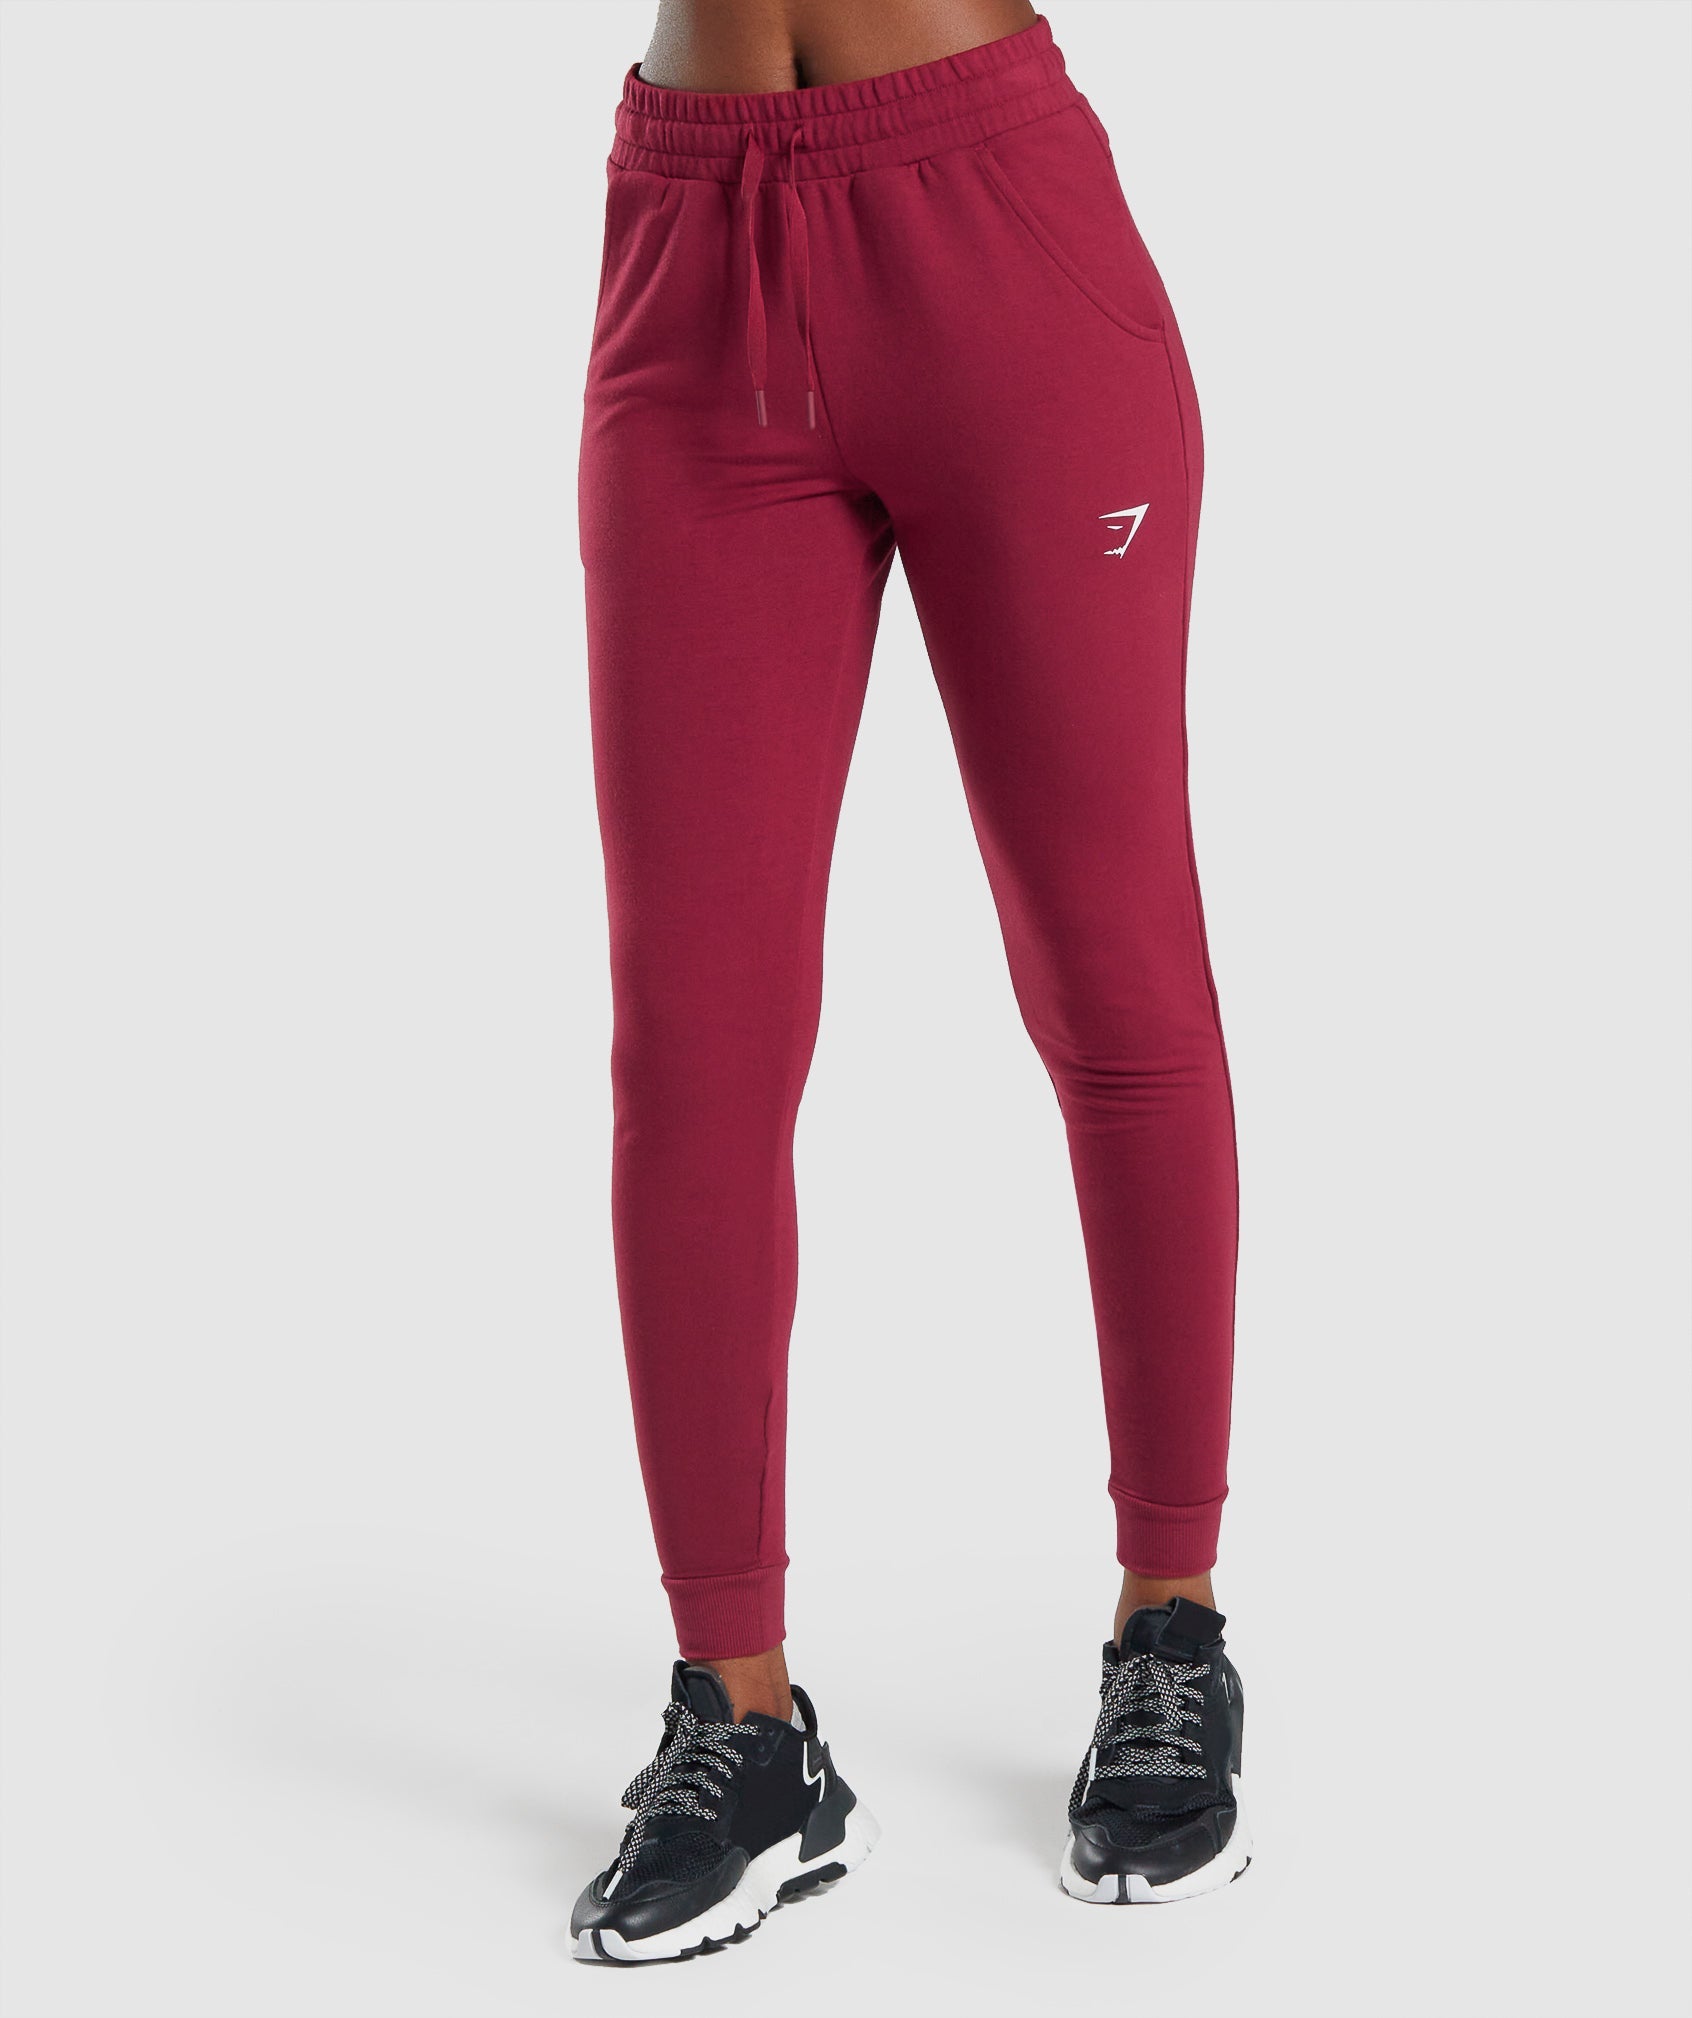 Pippa Training Joggers in Burgundy - view 1